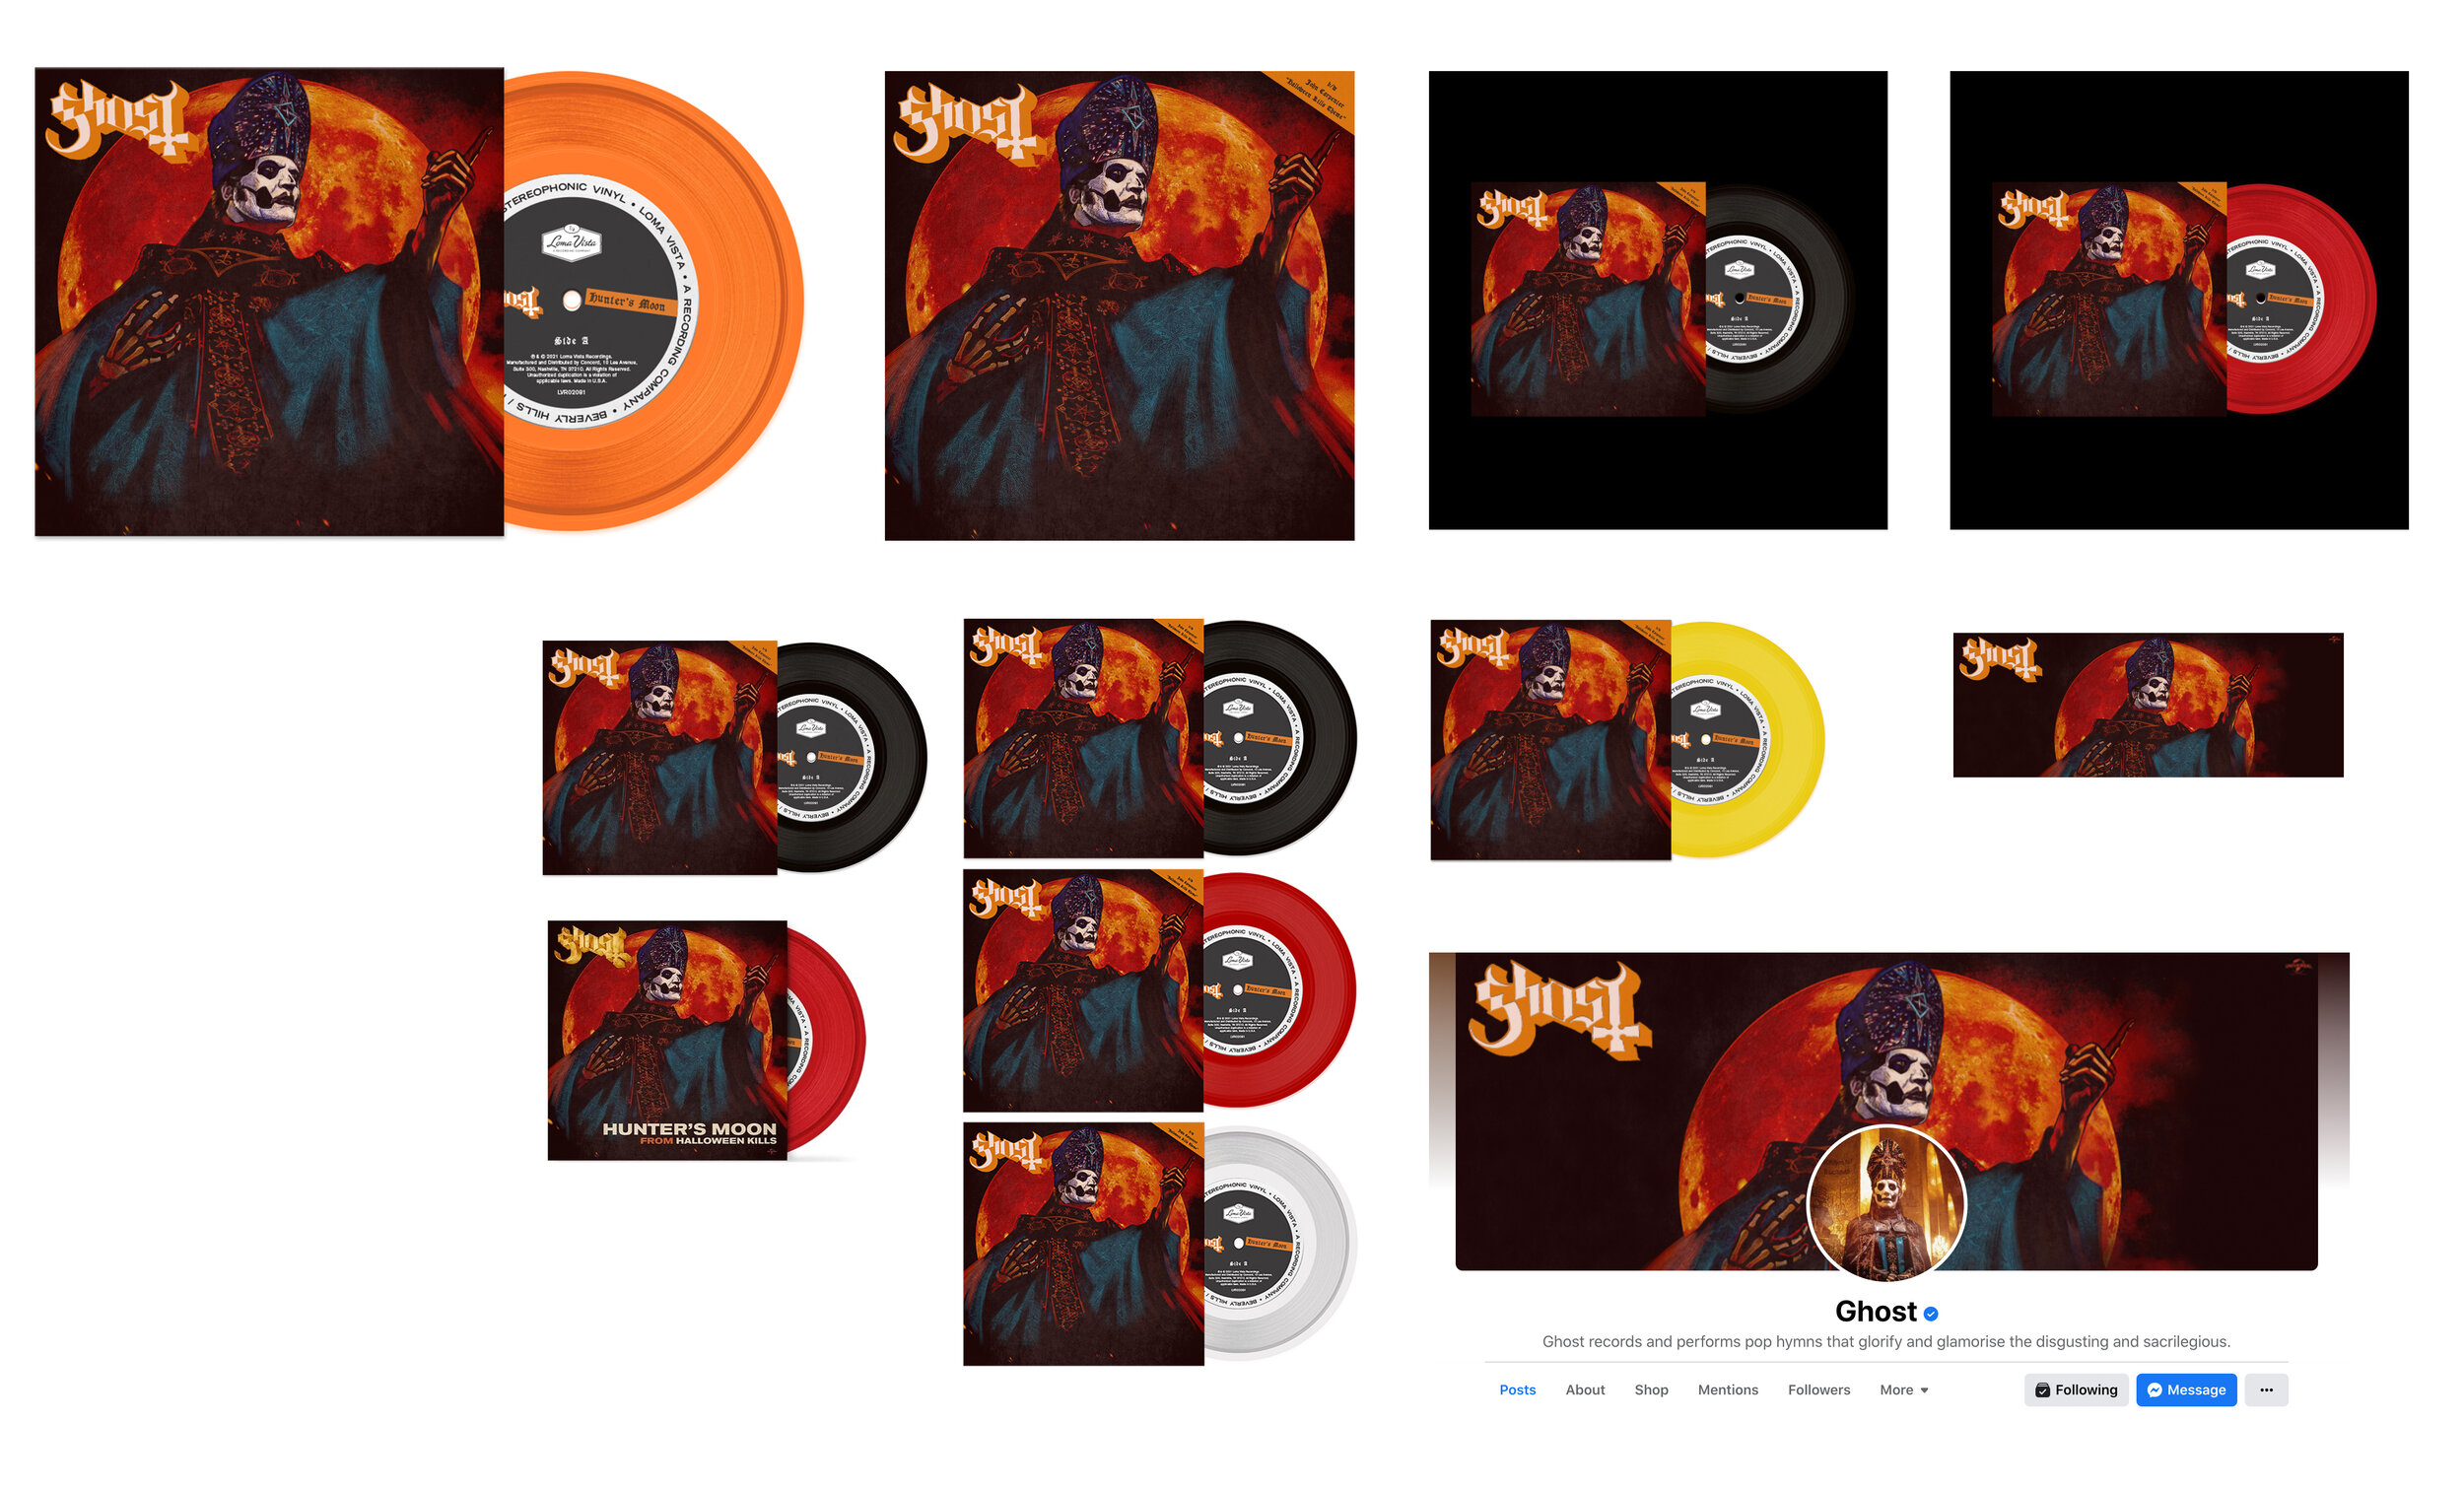   GHOST |   Hunter’s Moon   | various color vinyl 7” singles |  from the  Halloween Kills  movie soundtrack   Acrylic and digital 